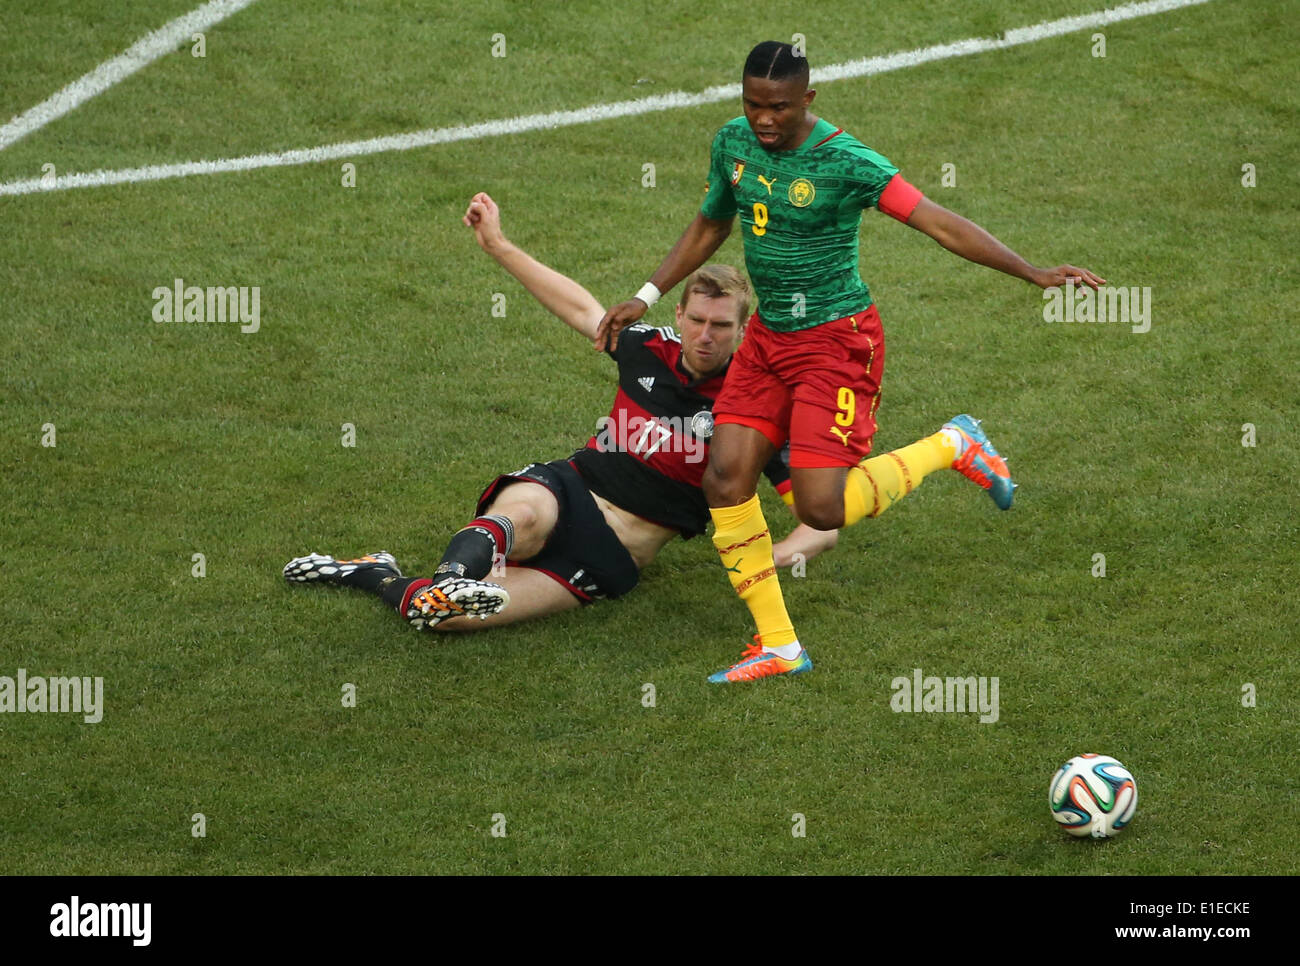 Germany's Per Mertesacker (L) in action against Cameroon's Samuel Eto'o during the friendly soccer match between Germany and Cameroon at the Borussia Park stadium in Moenchengladbach, Germany, 01 June 2014. Photo: Rolf Vennenbernd/dpa Stock Photo